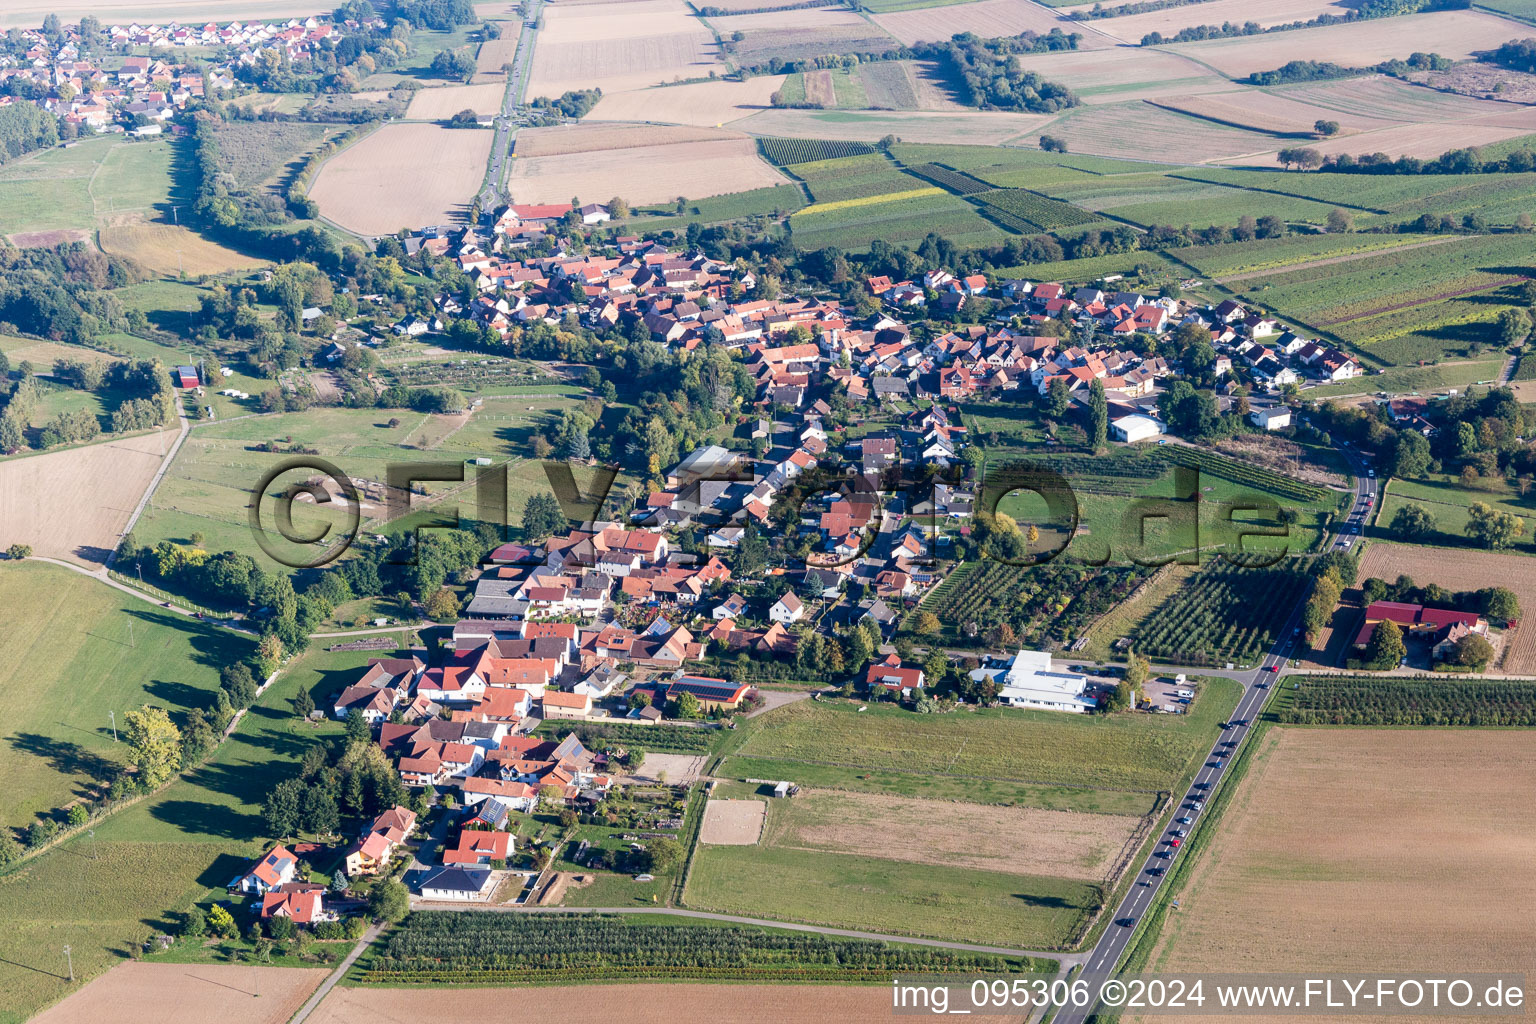 Village - view on the edge of agricultural fields and farmland in Oberhausen in the state Rhineland-Palatinate, Germany